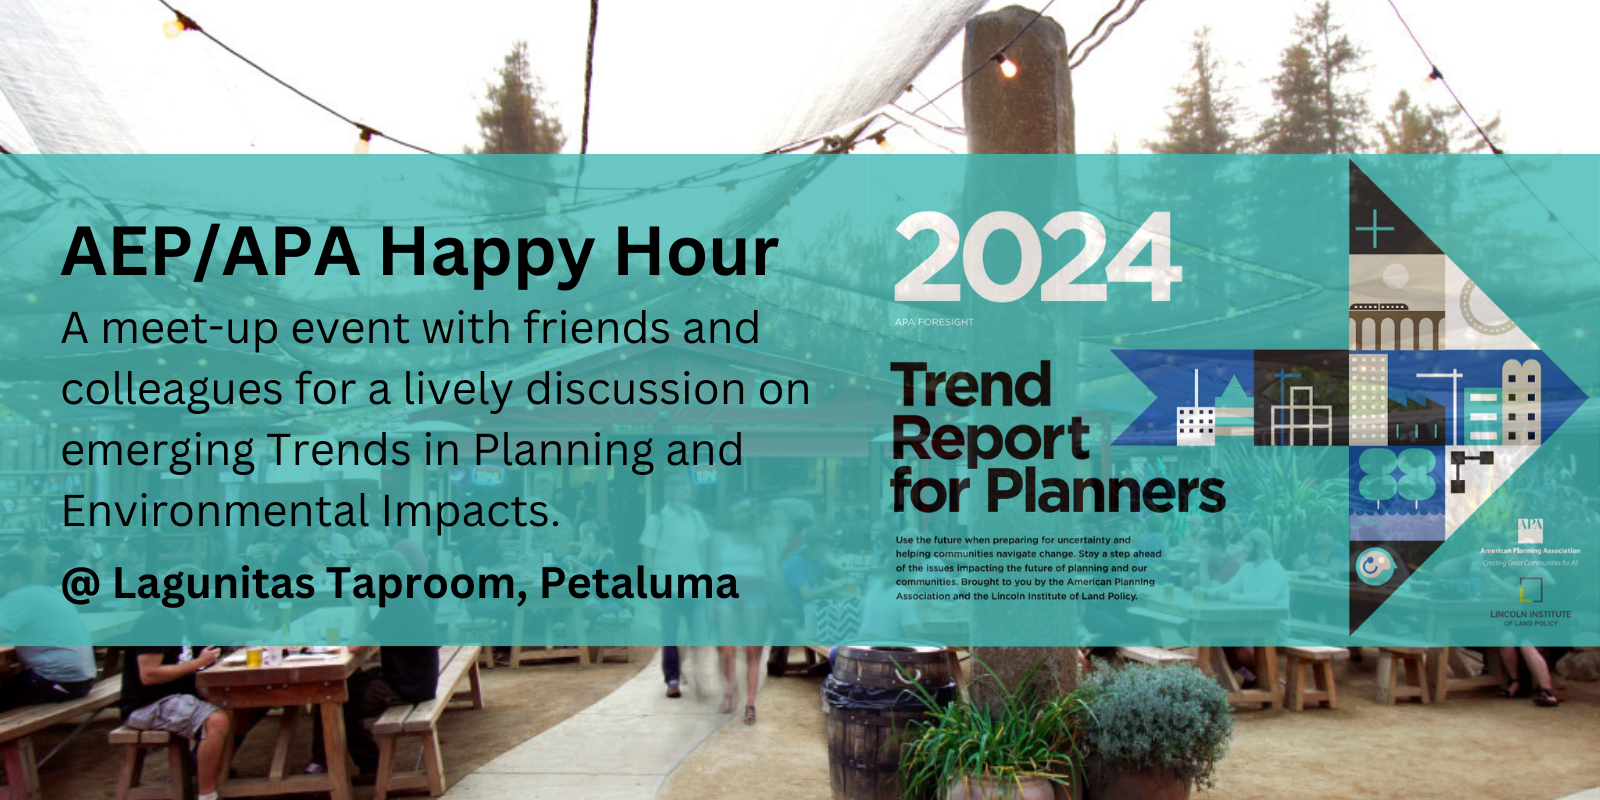 AEP/APA Happy Hour: Emerging Trends in Planning and Environmental Impacts